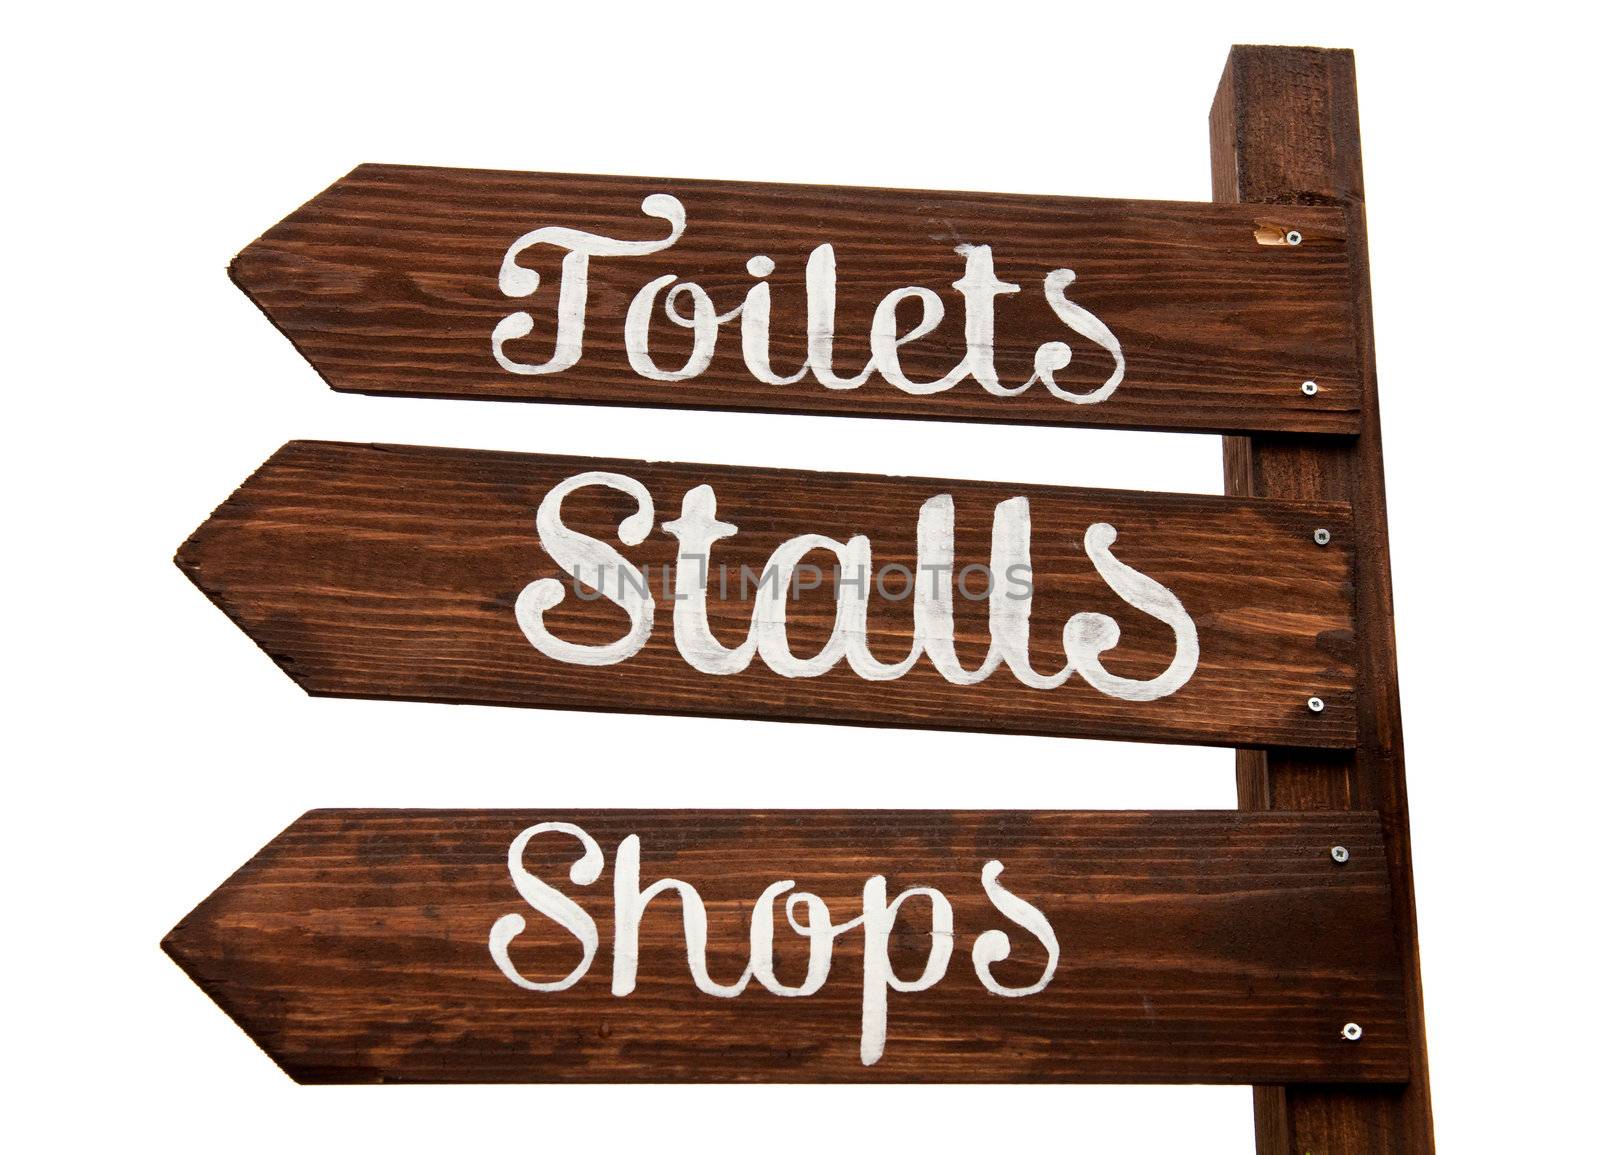 wooden signage indicating toilets, stalls and shopping area (isolated on white background)